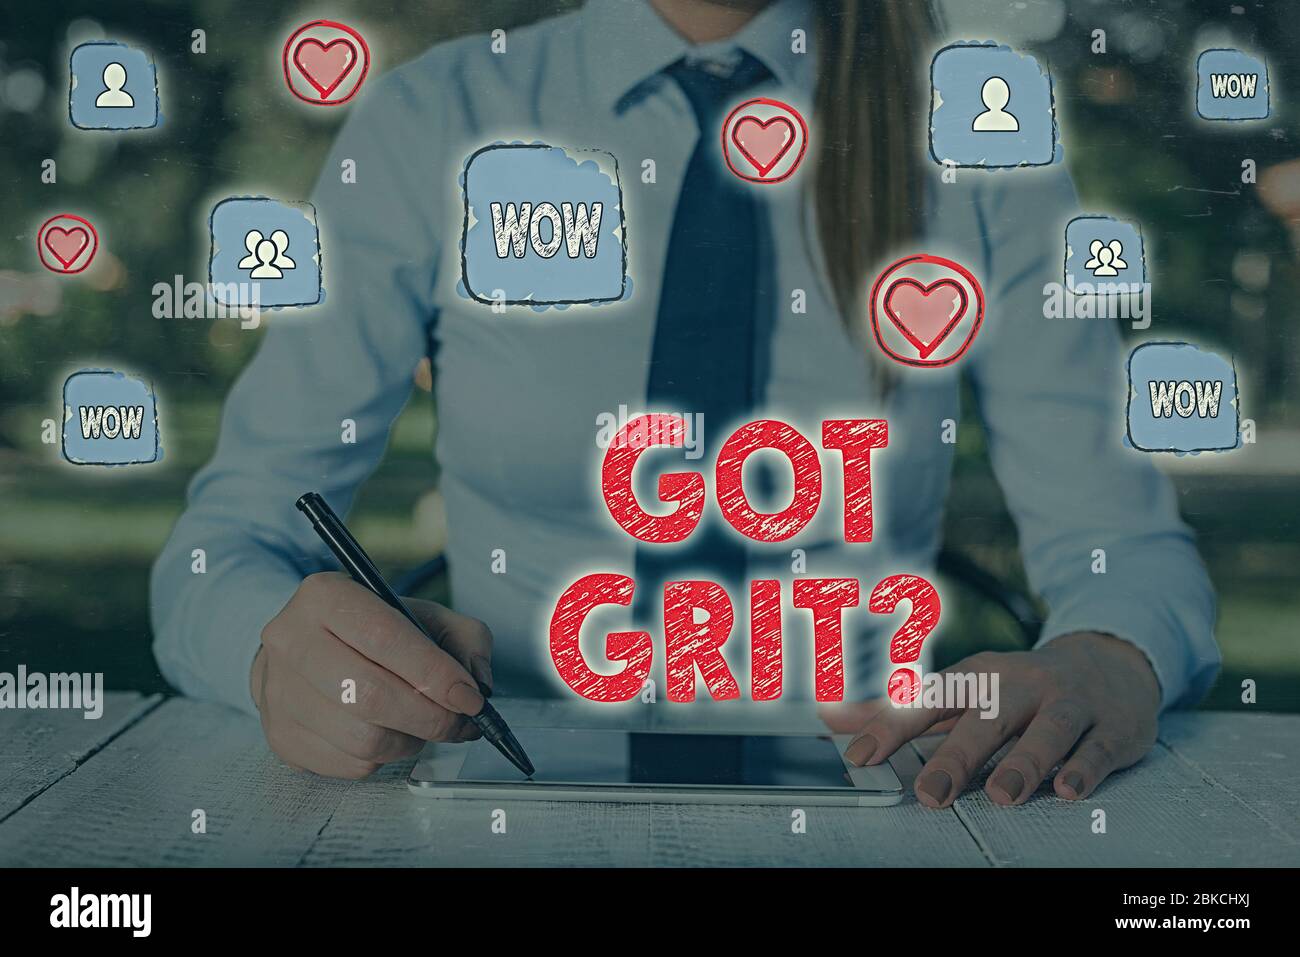 Writing note showing Got Grit Question. Business concept for A hardwork with perseverance towards the desired goal Stock Photo